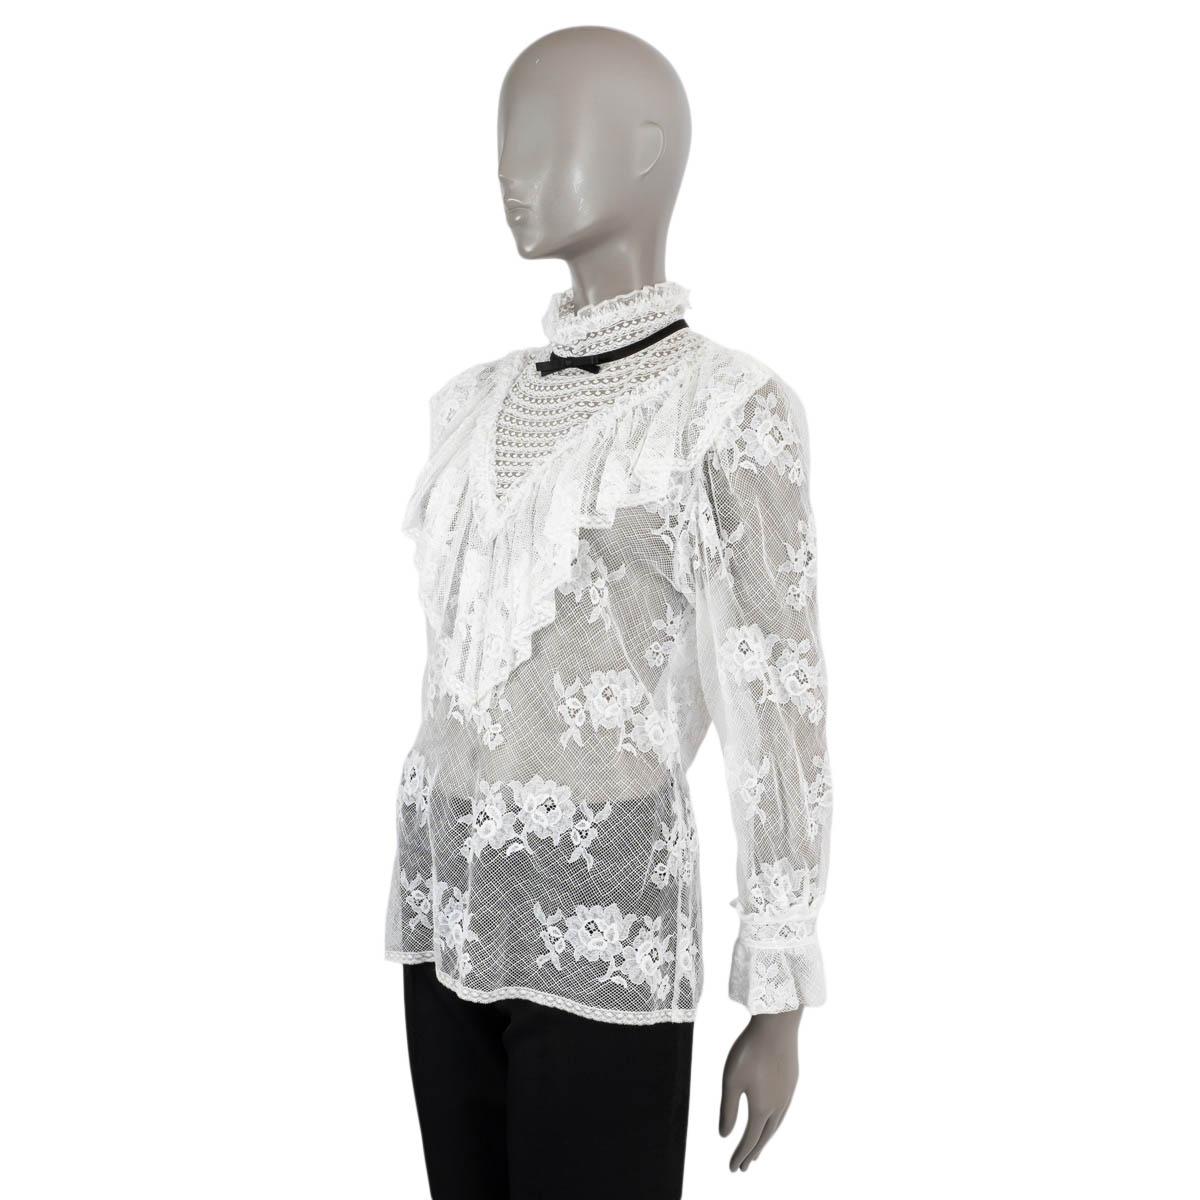 MIU MIU white cotton 2019 SHEER RUFFLED FLORAL LACE MOCK NECK Blouse Shirt S In Excellent Condition For Sale In Zürich, CH